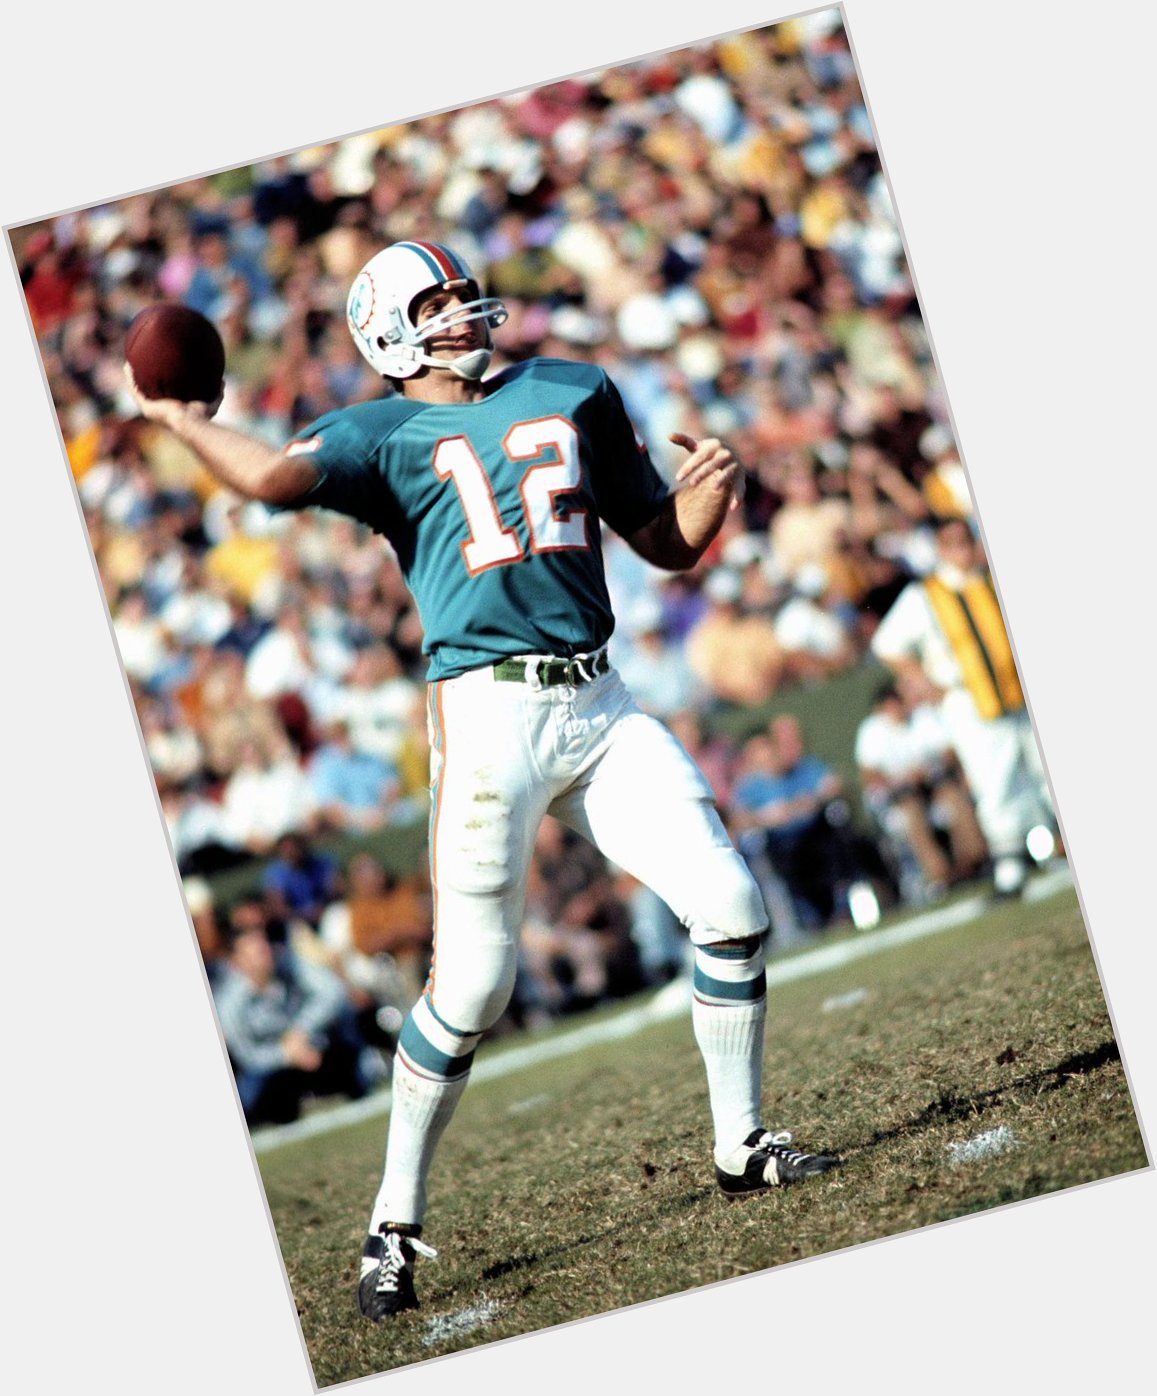 Happy BDay to our lifetime member and Hall of Famer Bob Griese! 